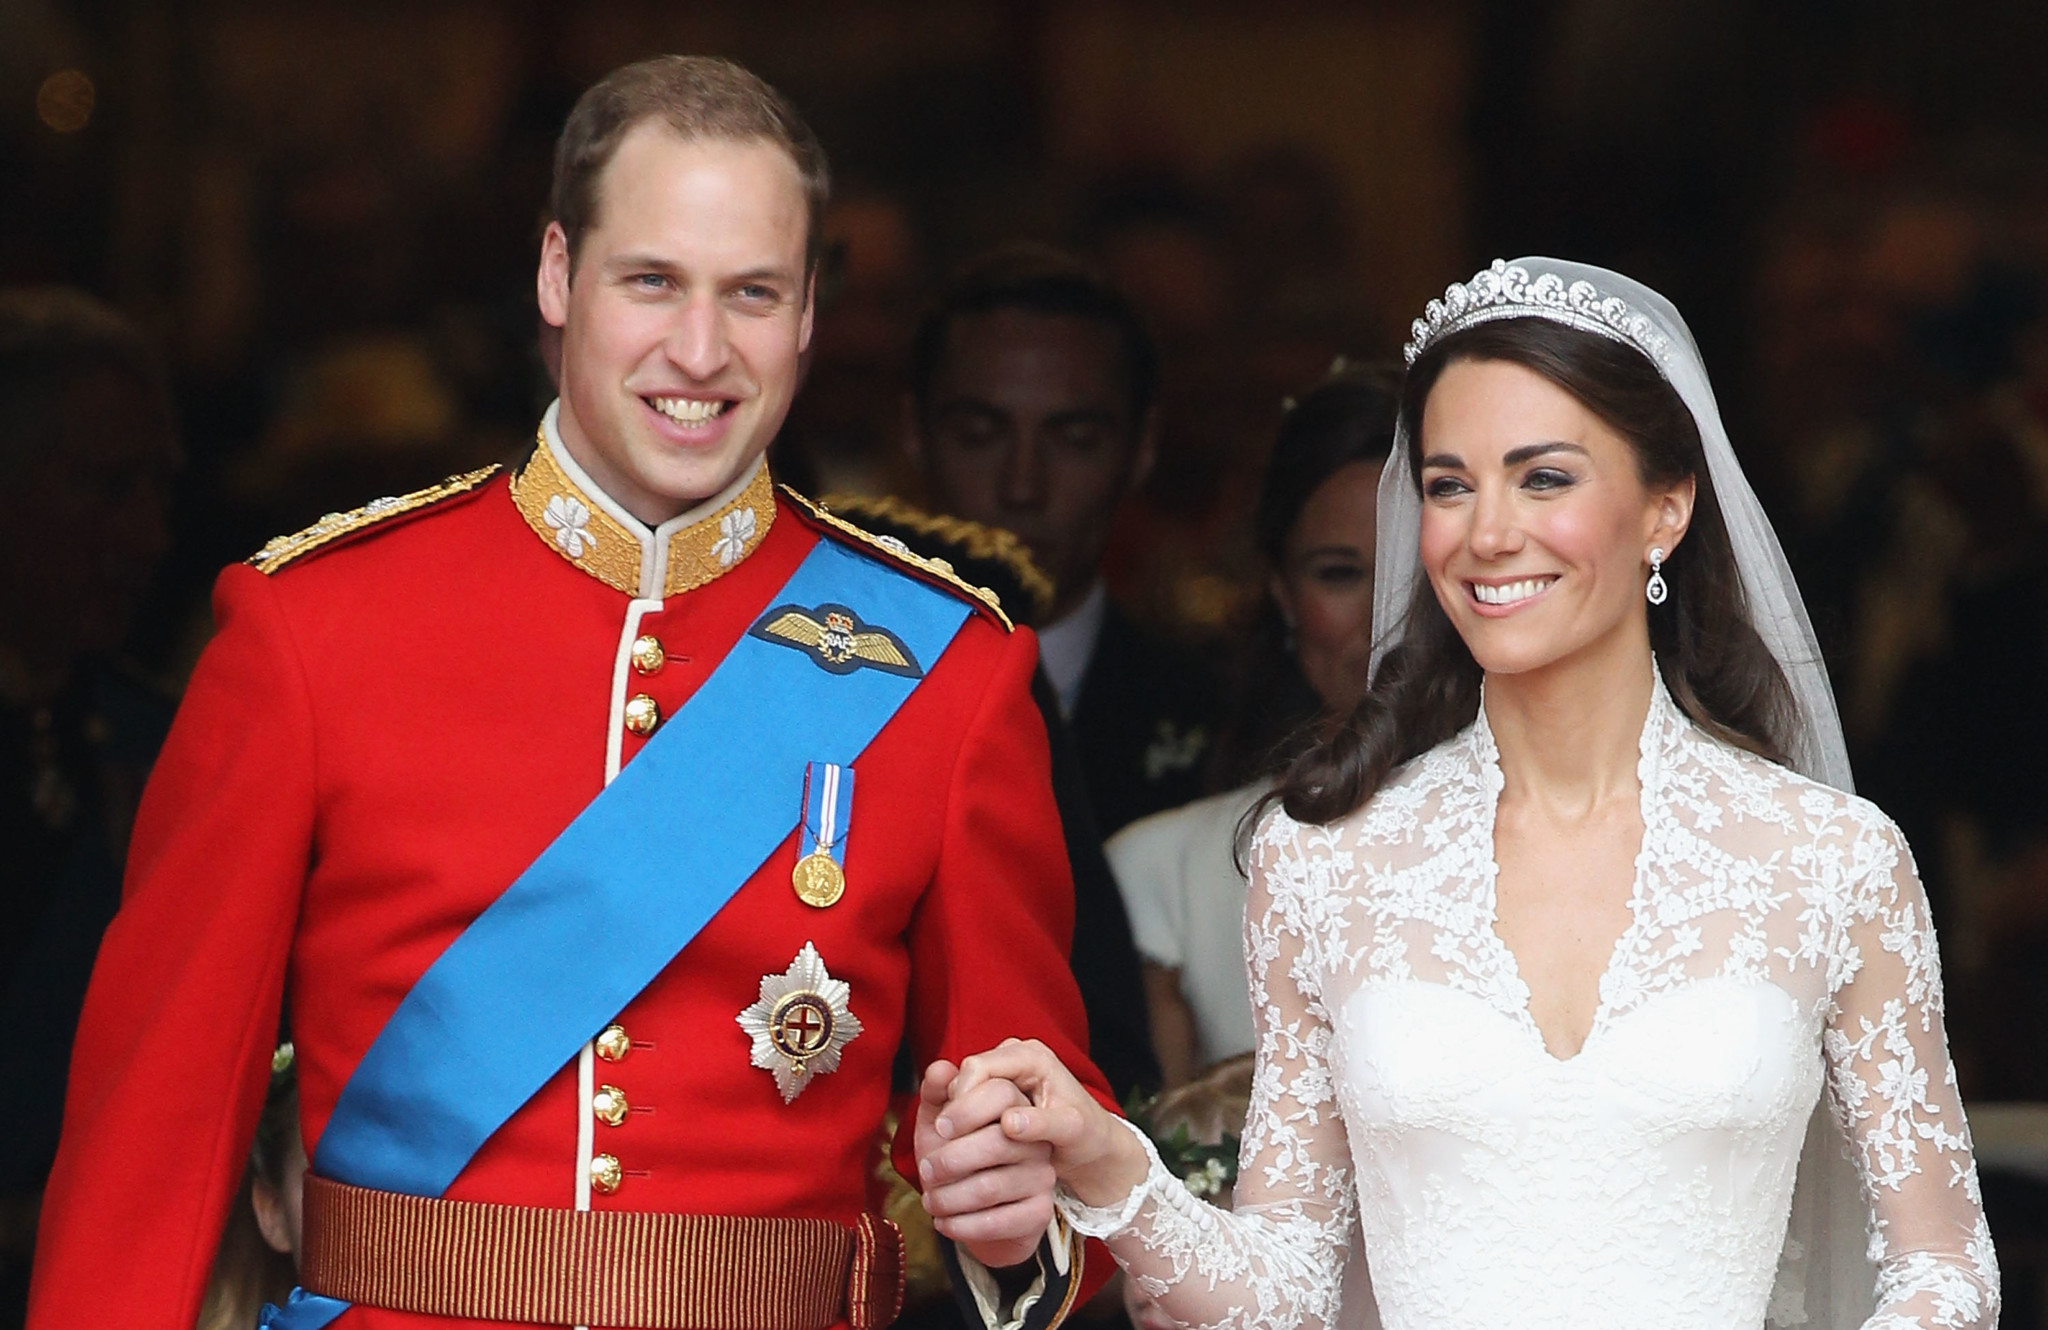 8 Best Moments From Prince William & Kate Middleton's Royal Wedding